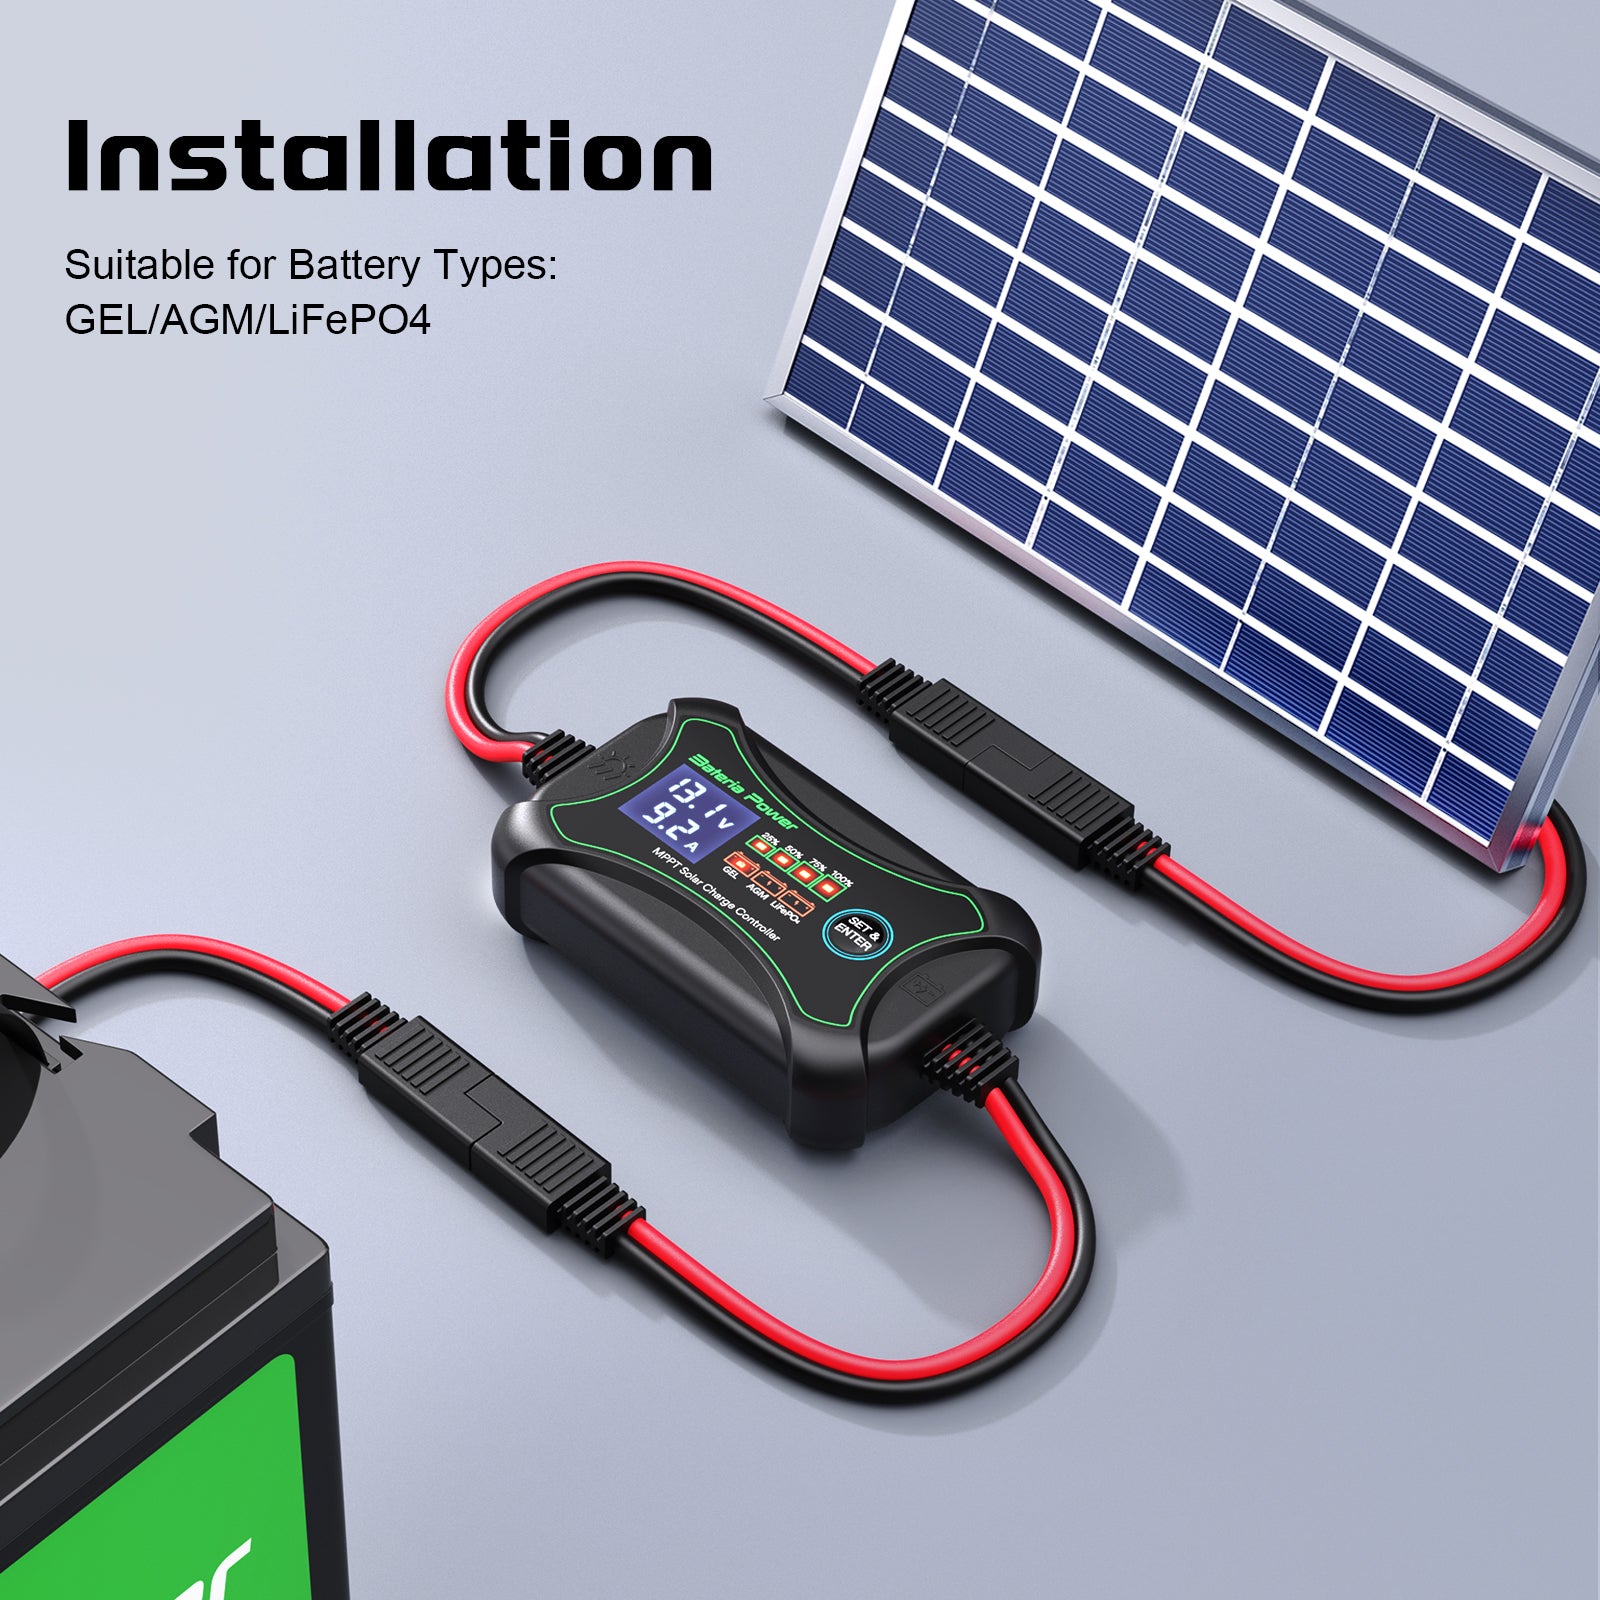 Solar Intelligent 10 Amp 12 Volt Solar Regulator with LCD Display and LED Indicate Light Designed for 12V Gel AGM Lithium LiFePO4 Battery Charging